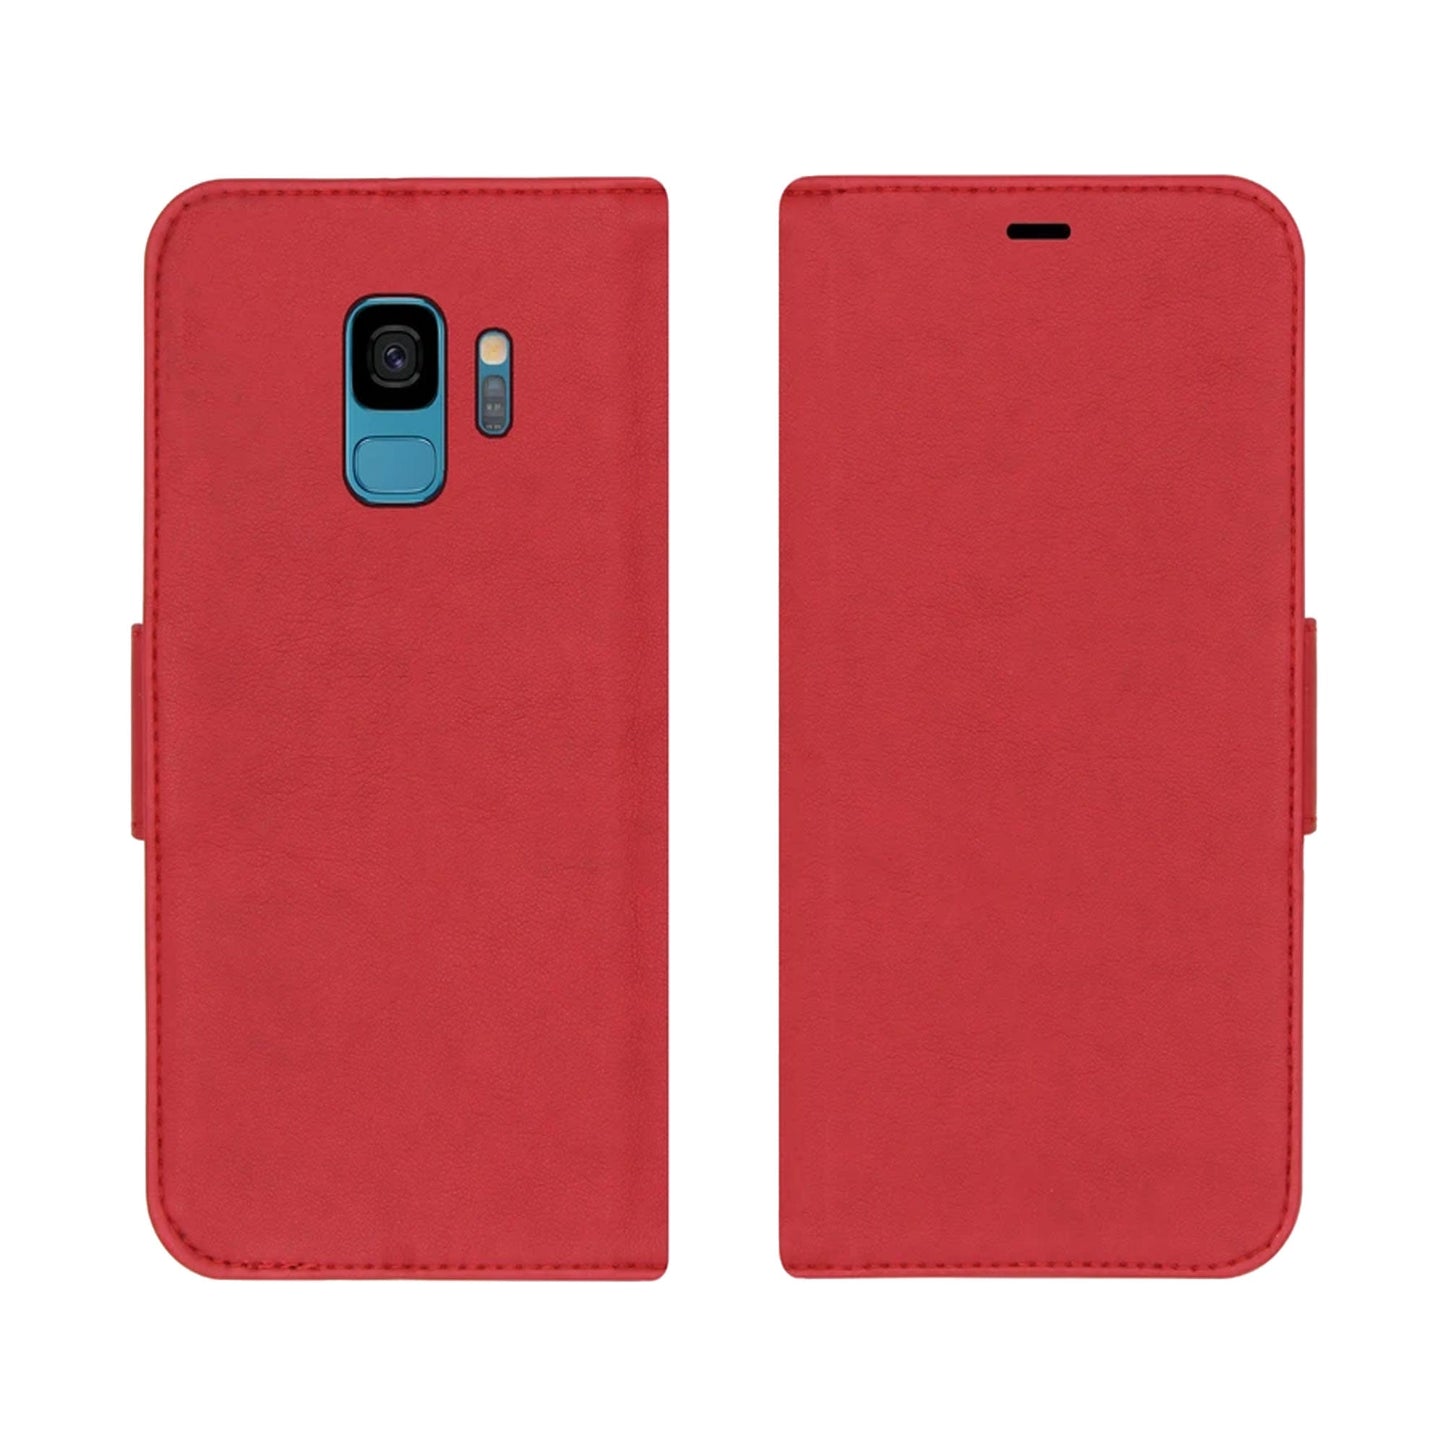 Uni Red Victor Case for iPhone and Samsung